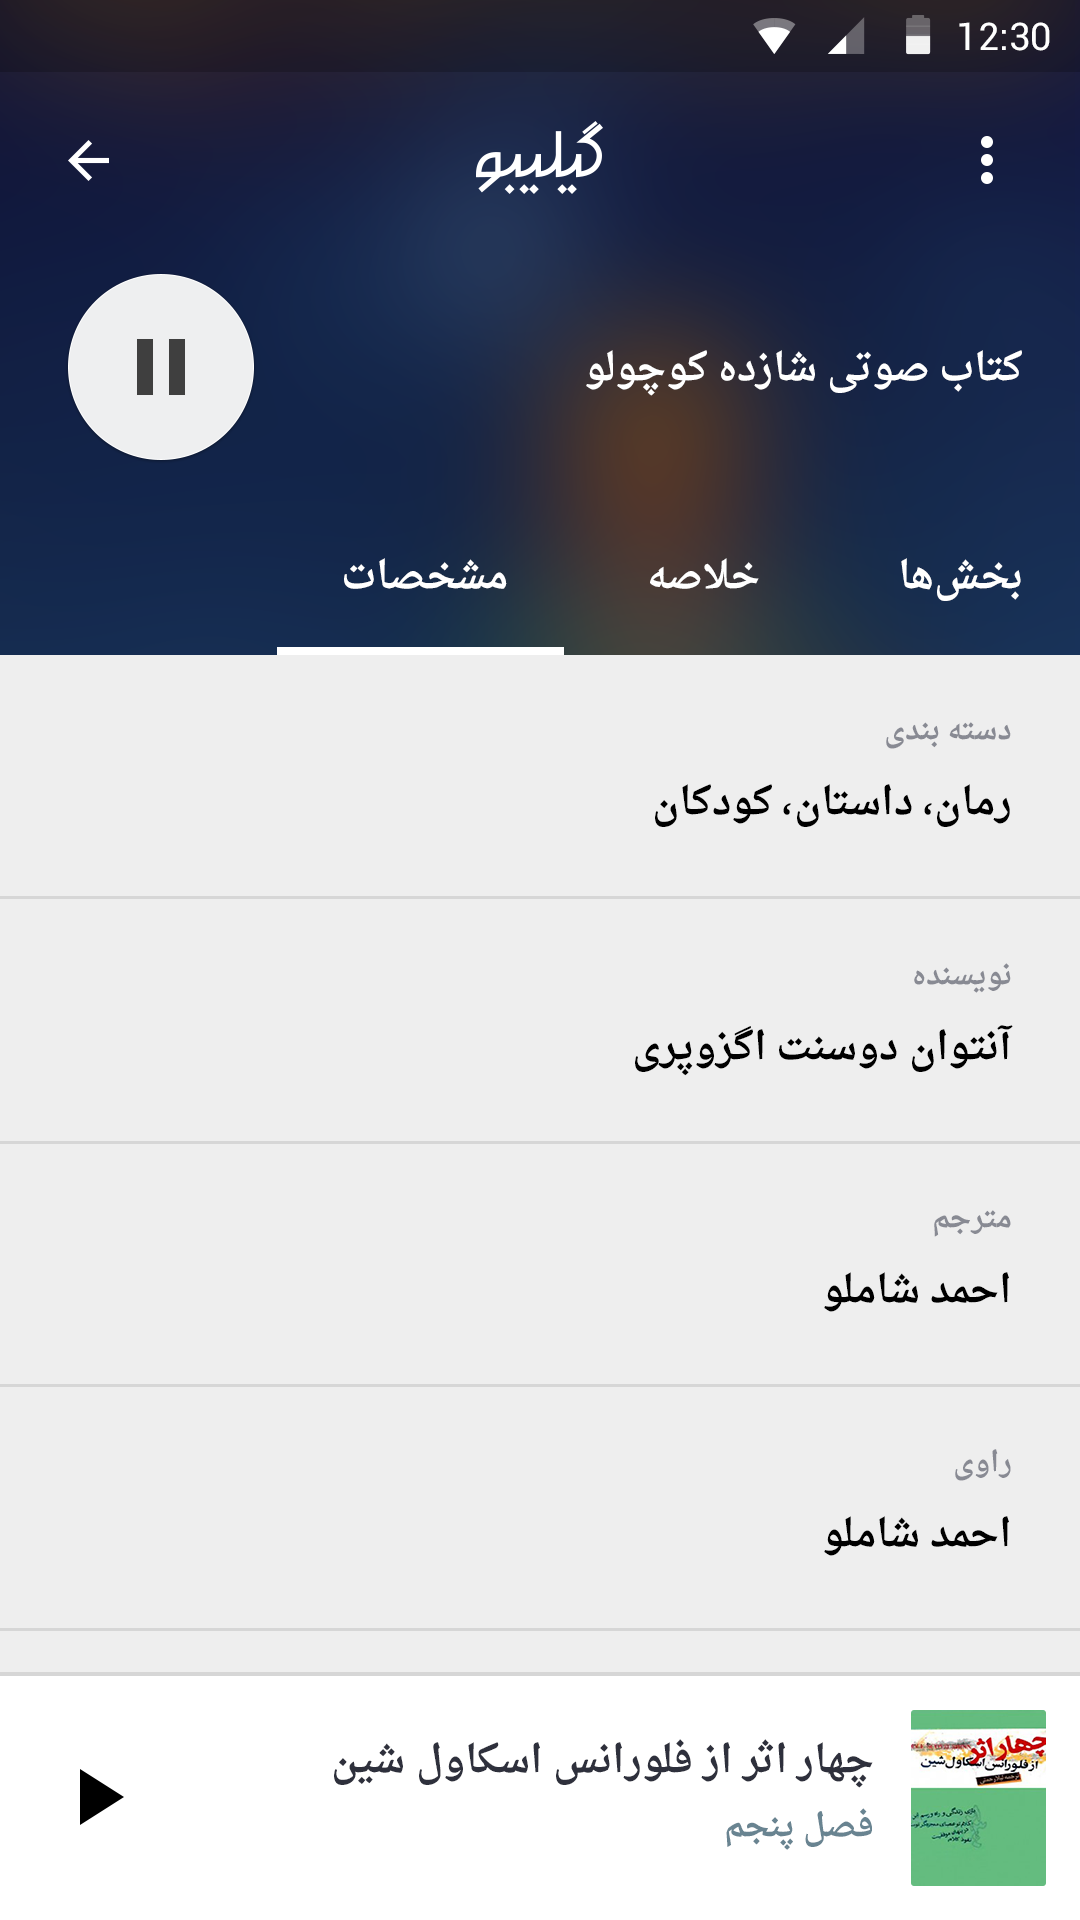 Gilibo for Android by Pouya Saadeghi - /projects/3XcVdV5qunrBvLWrOJ14EHyyGRSAm1uH.png